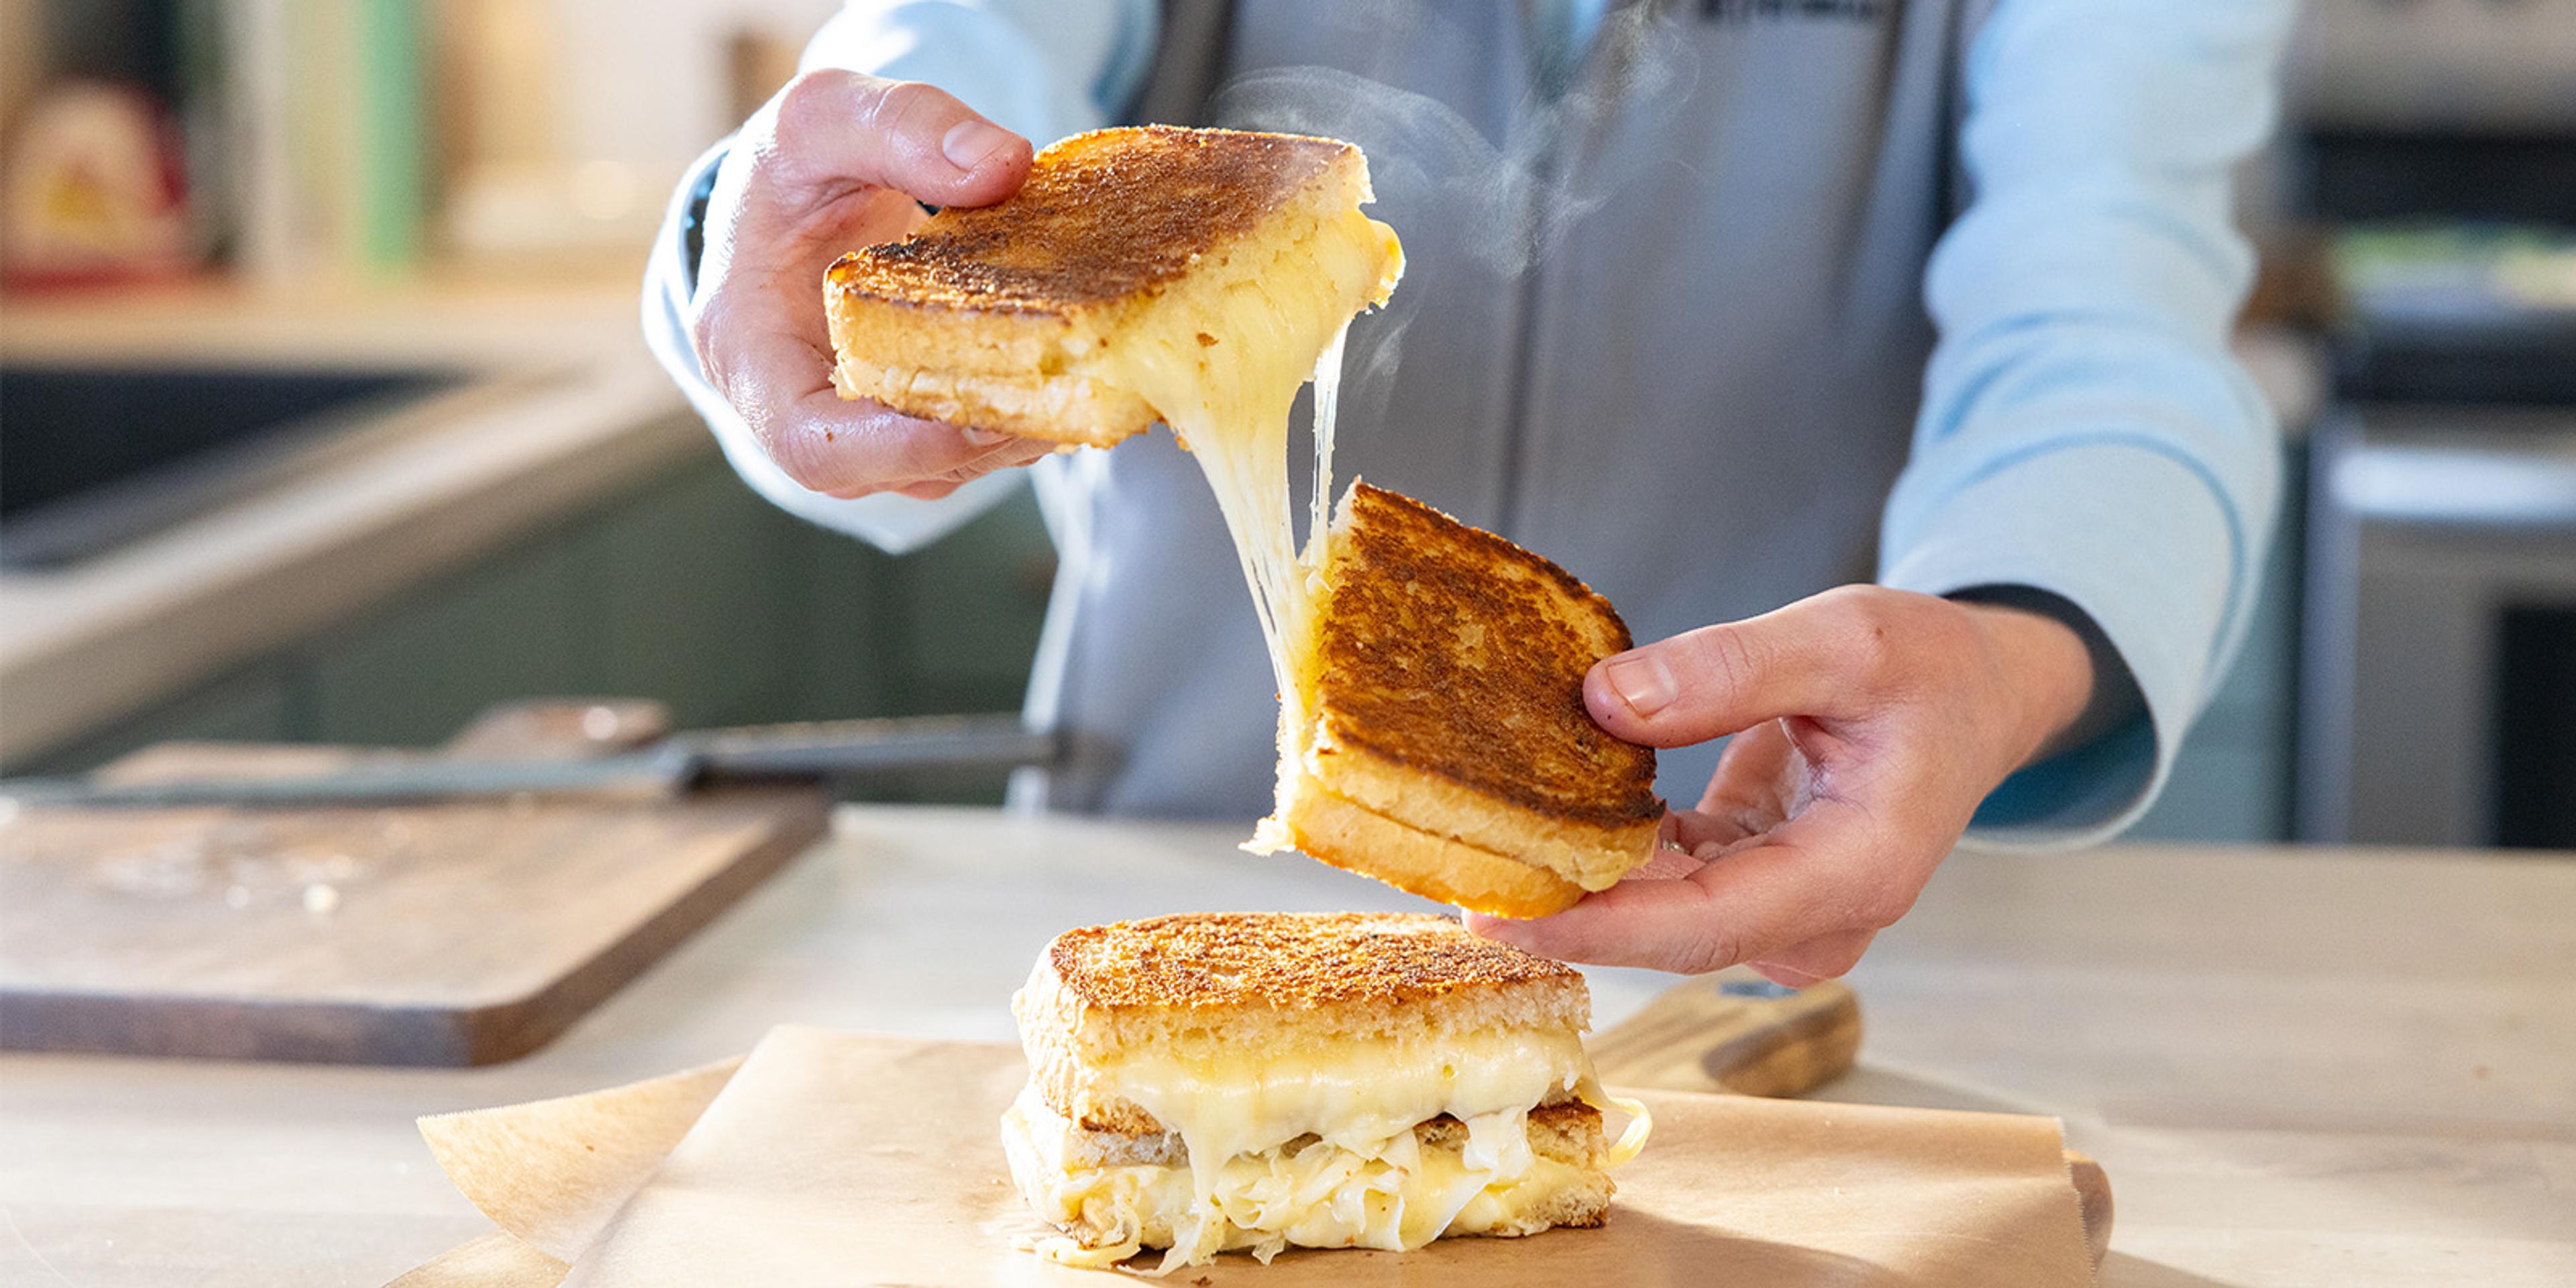 A person holds a gooey grilled cheese sandwich.